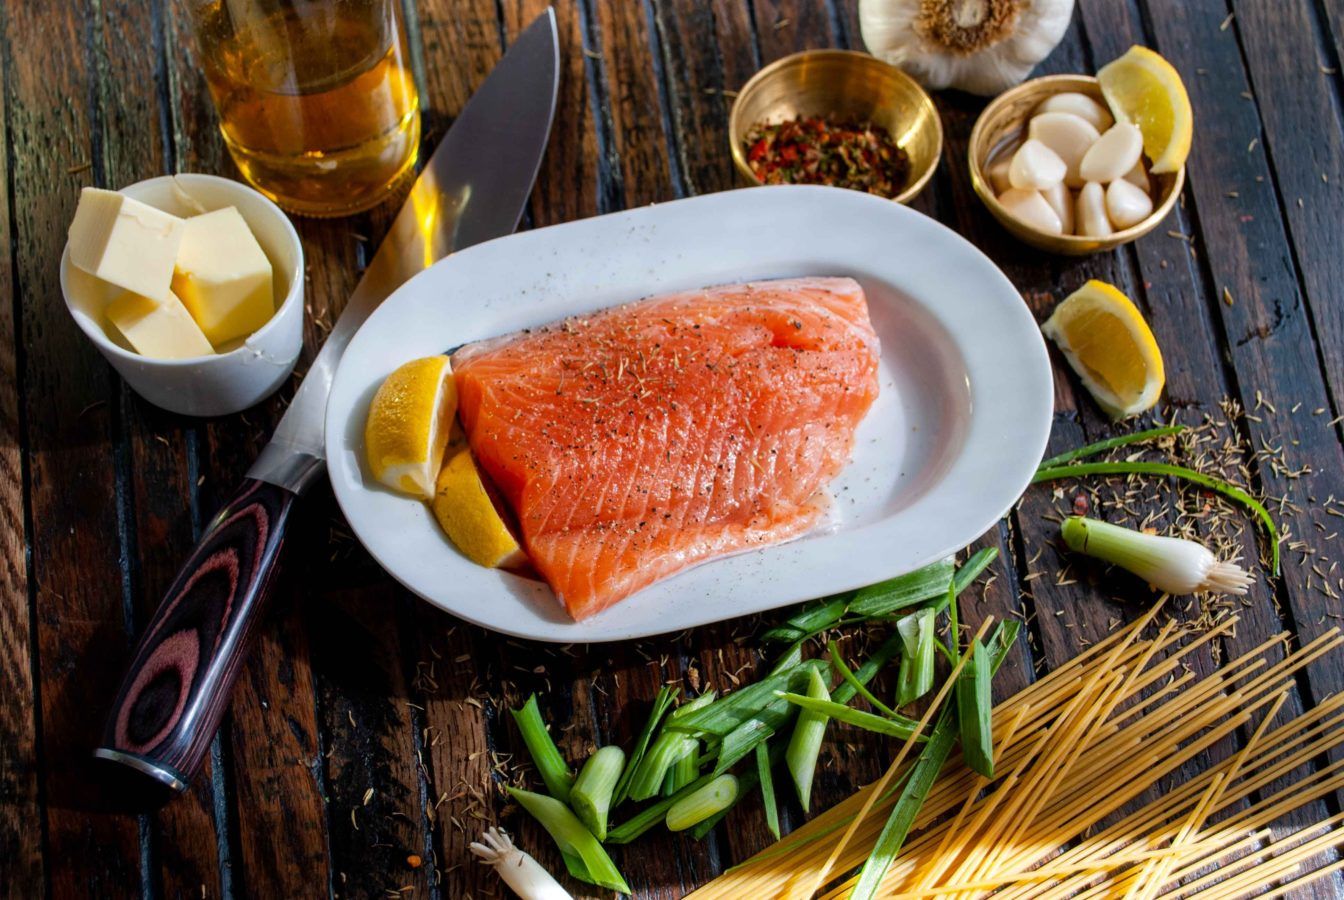 How to turn salmon and spinach into a gourmet dinner, as per Chef Thomas Keller